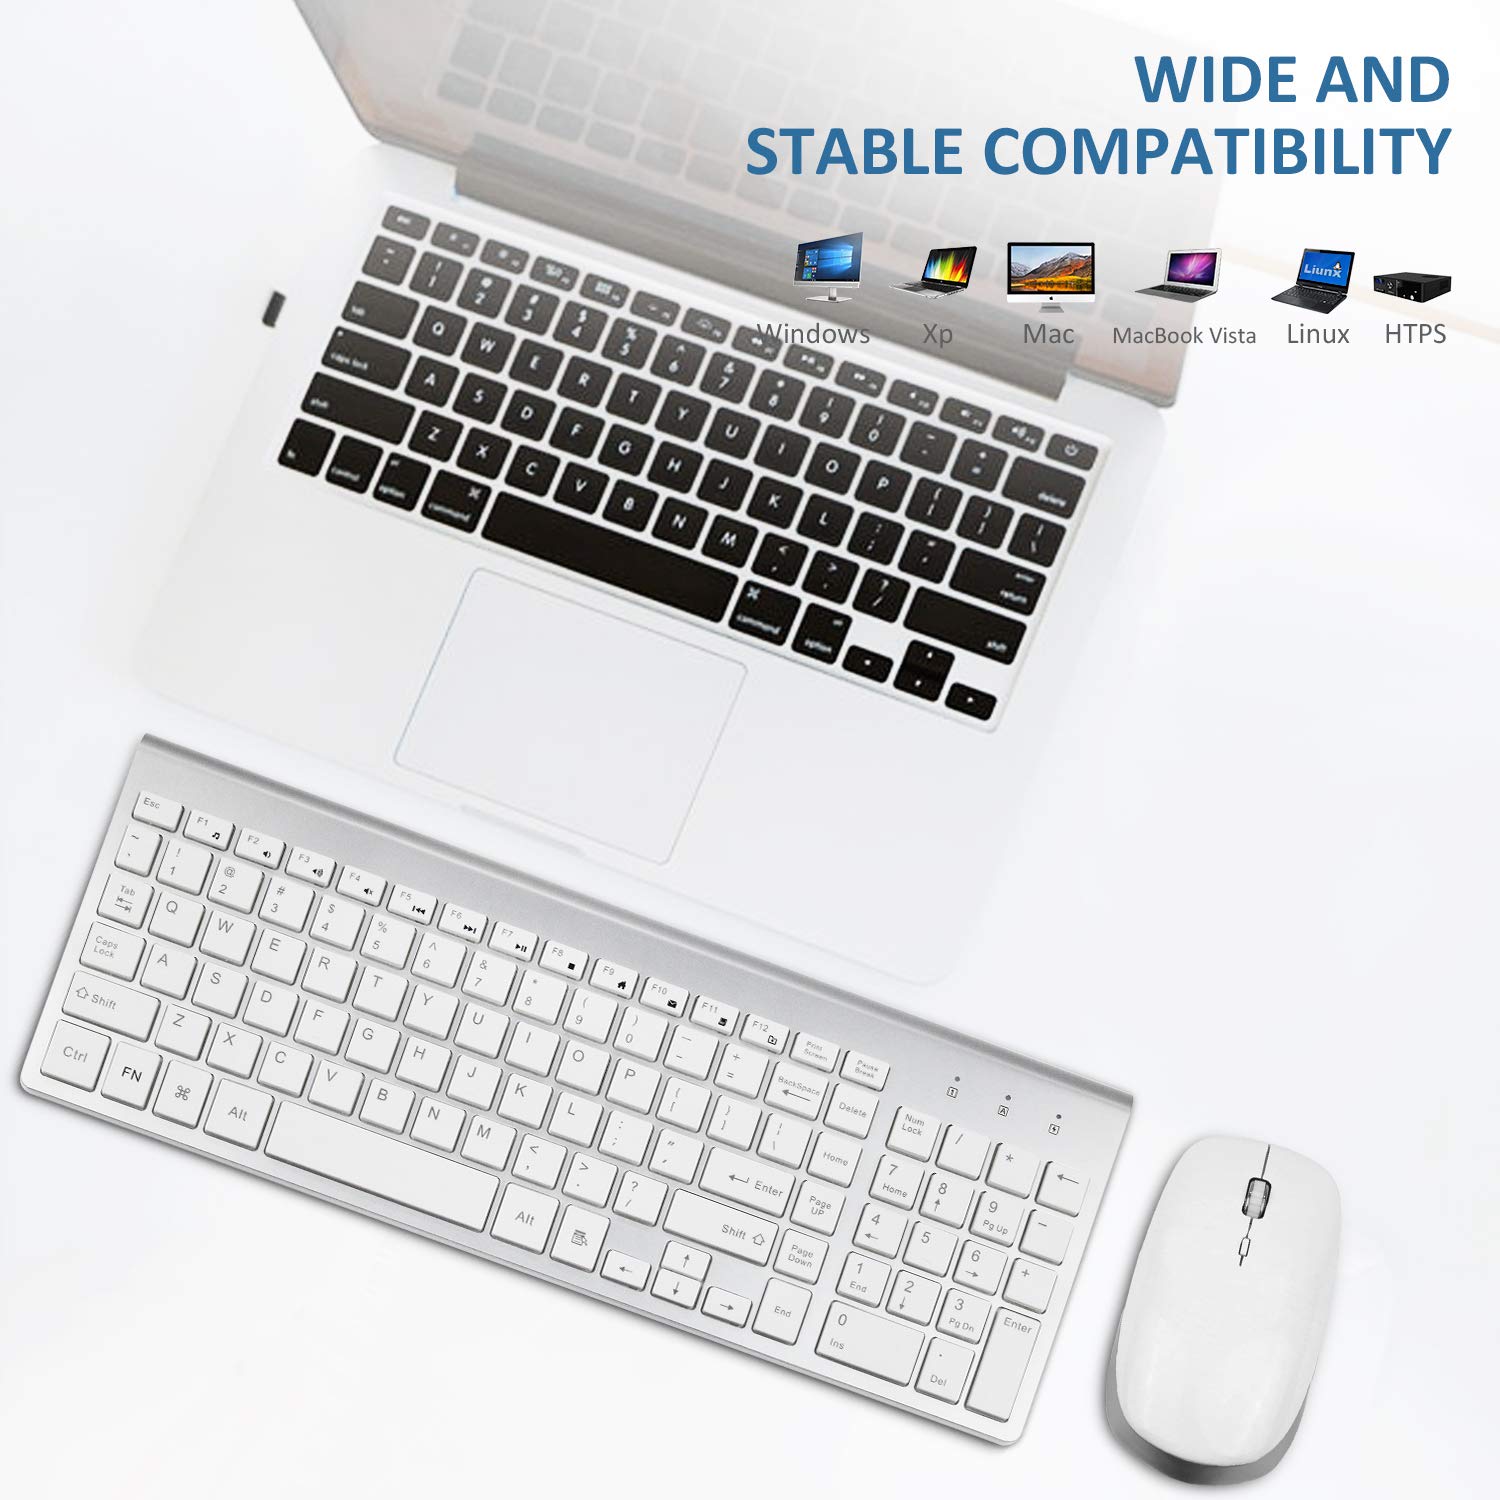 Wireless Keyboard and Mouse - FENIFOX USB Slim 2.4G Wireless Keyboard Mouse Combo Full-Size Ergonomic Compact with Number Pad for Laptop PC Computer Windows mac- Silver White